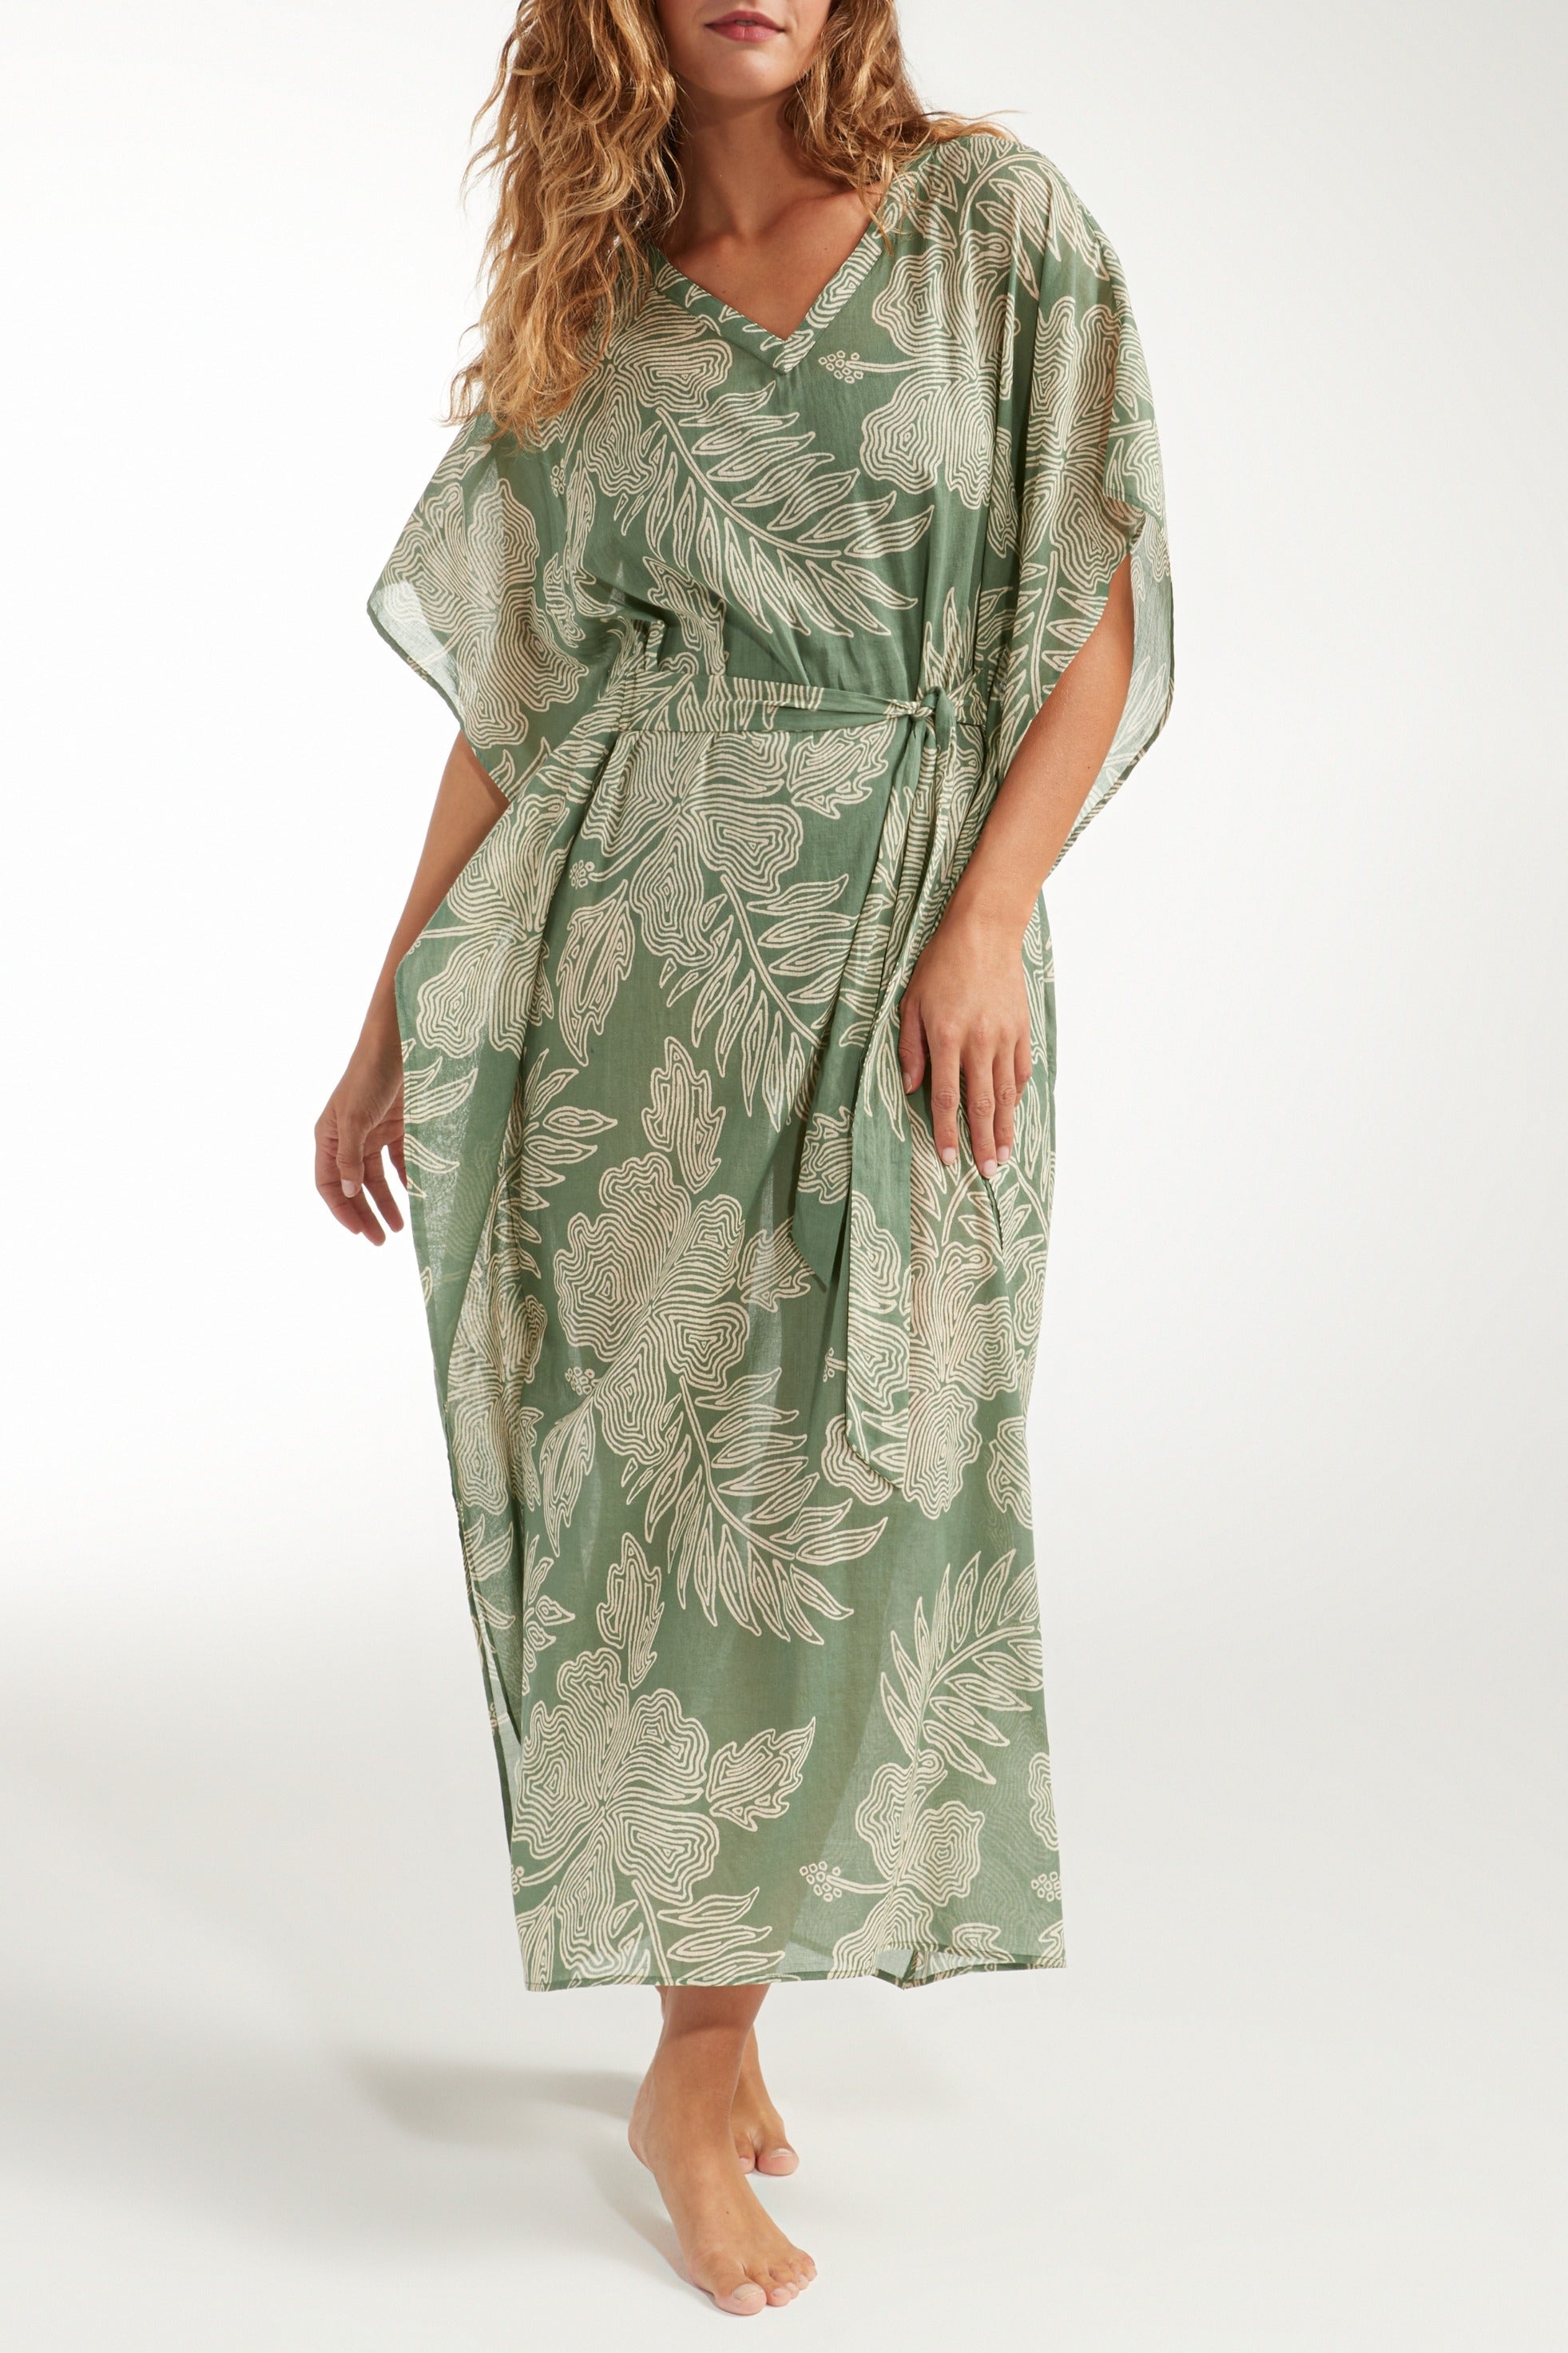 Carrie Long Caftan by Hermoza